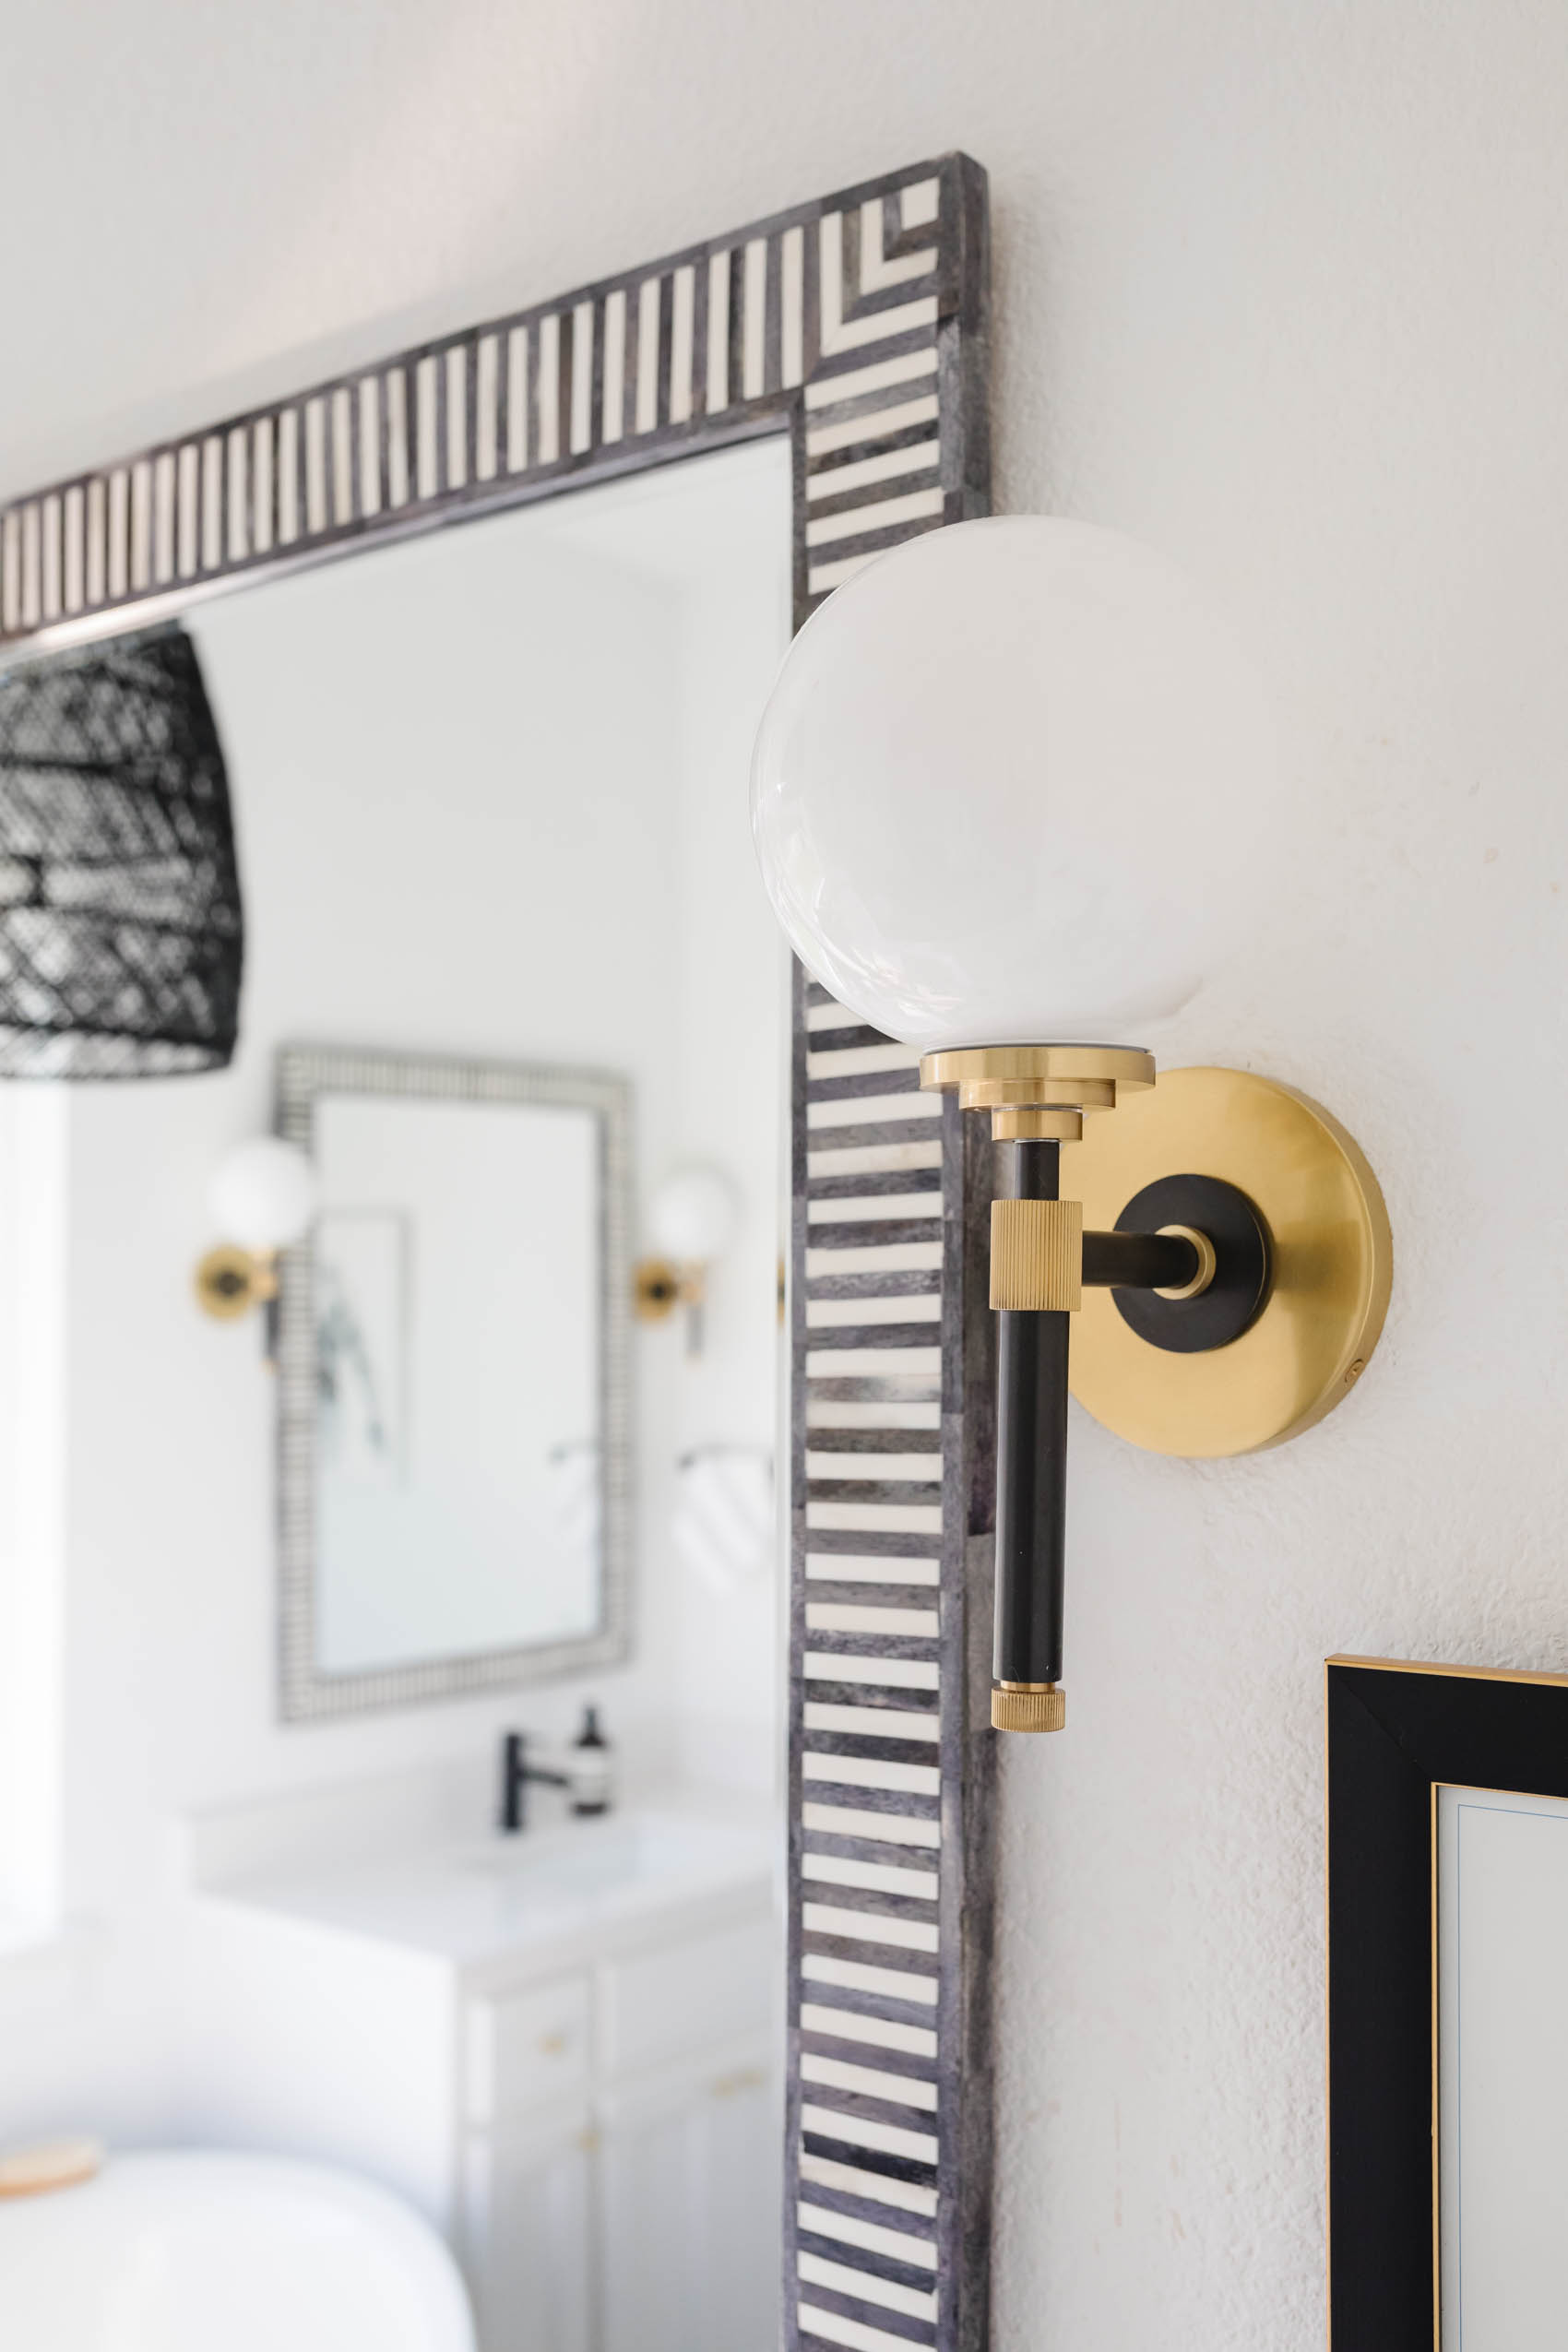 luxury bathroom accessories like Hudson Valley Bowery Sconce and Serena & Lily Bar harbor mirror